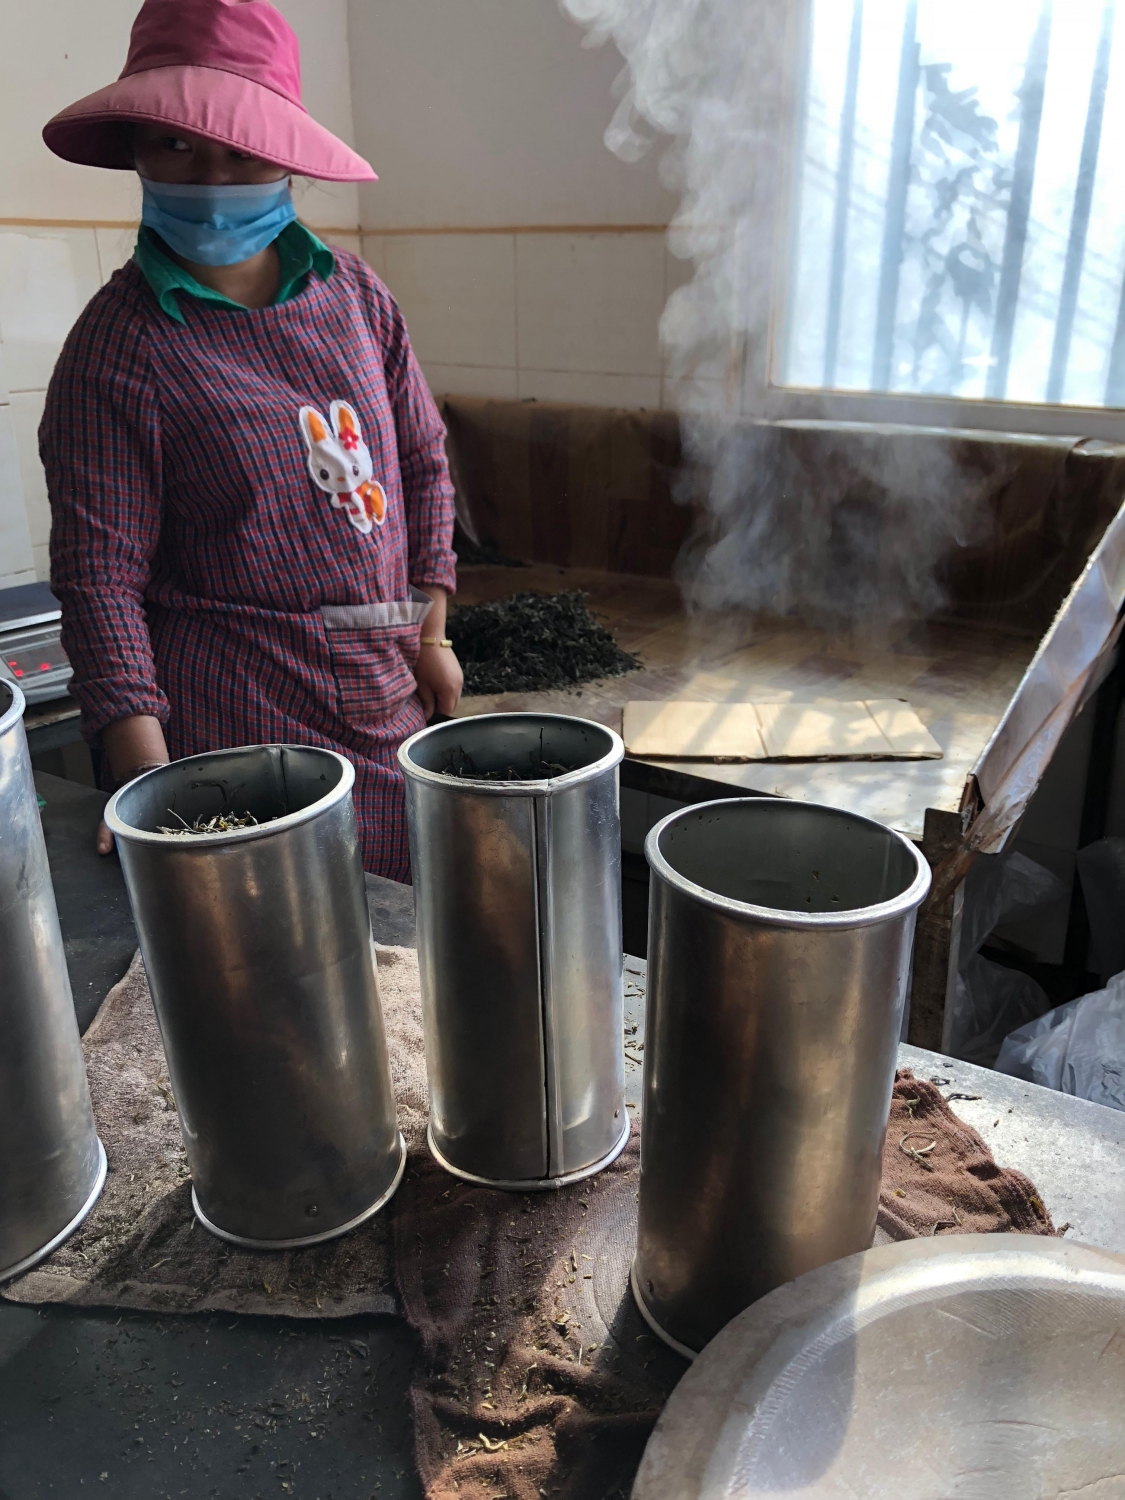 Steaming cylinders filled with Pu'er mao cha awaiting steaming and shaping